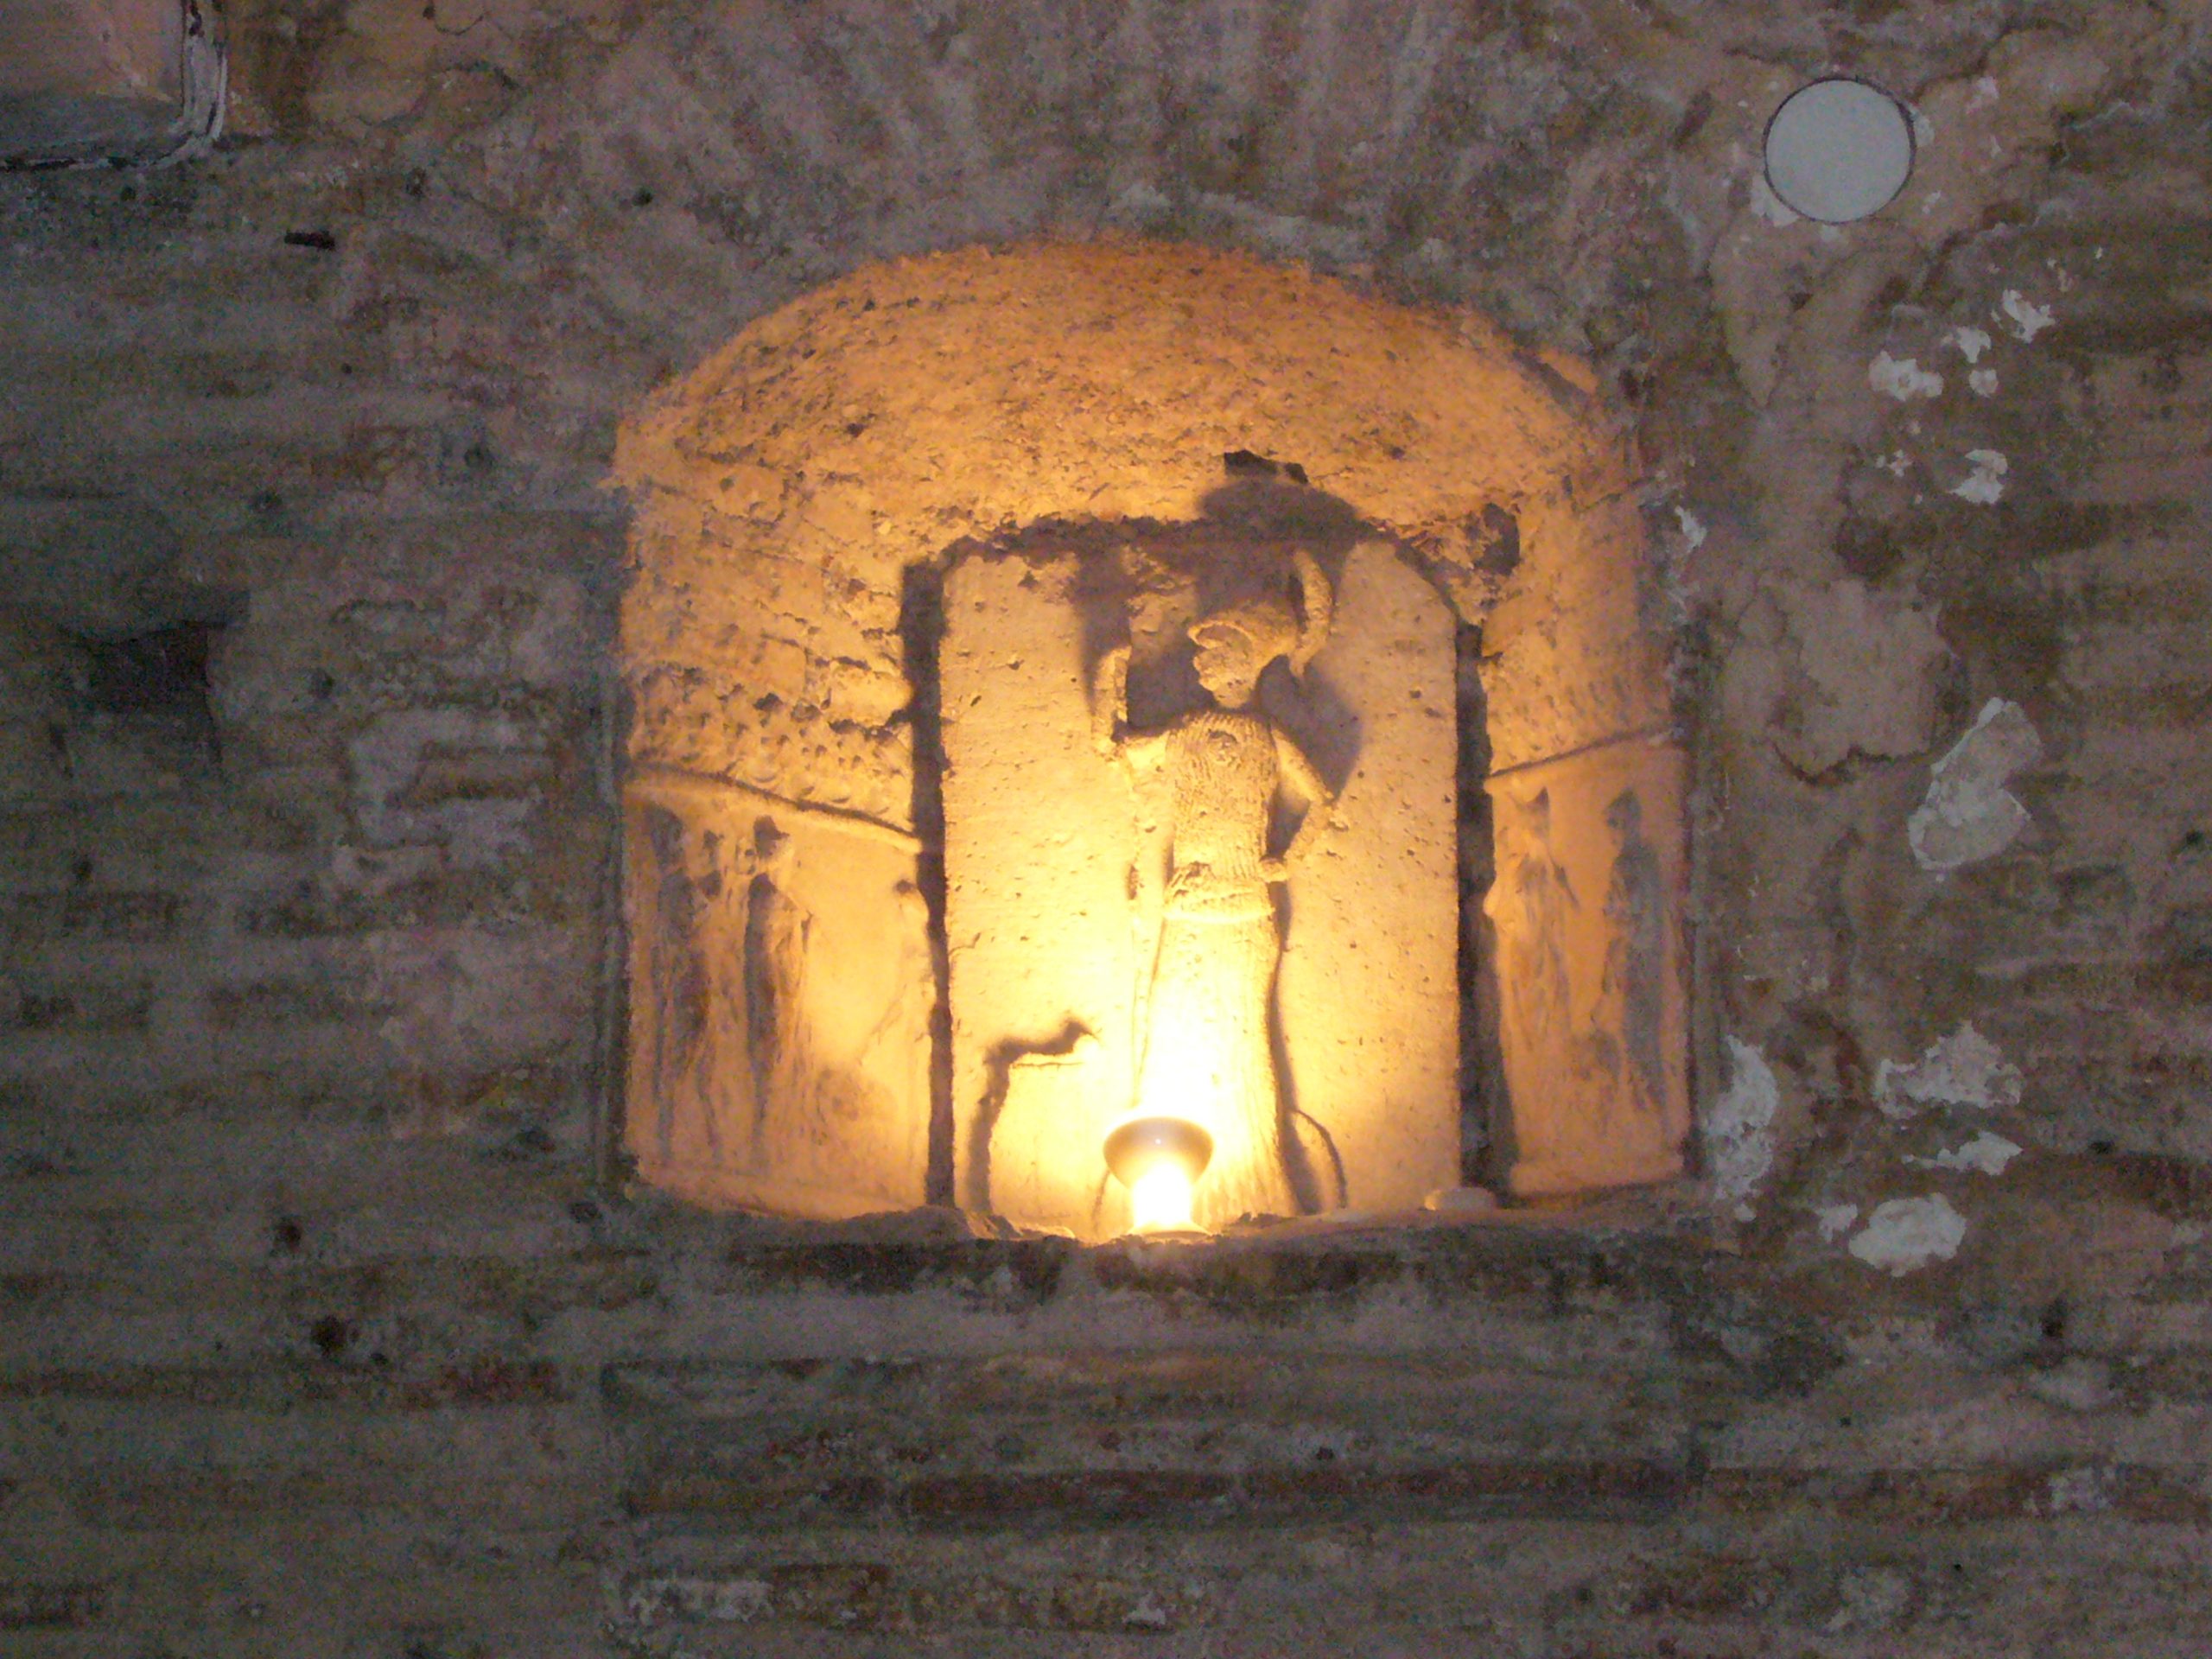 A niche in the wall containing a statuette of a helmed figure, lit from below.